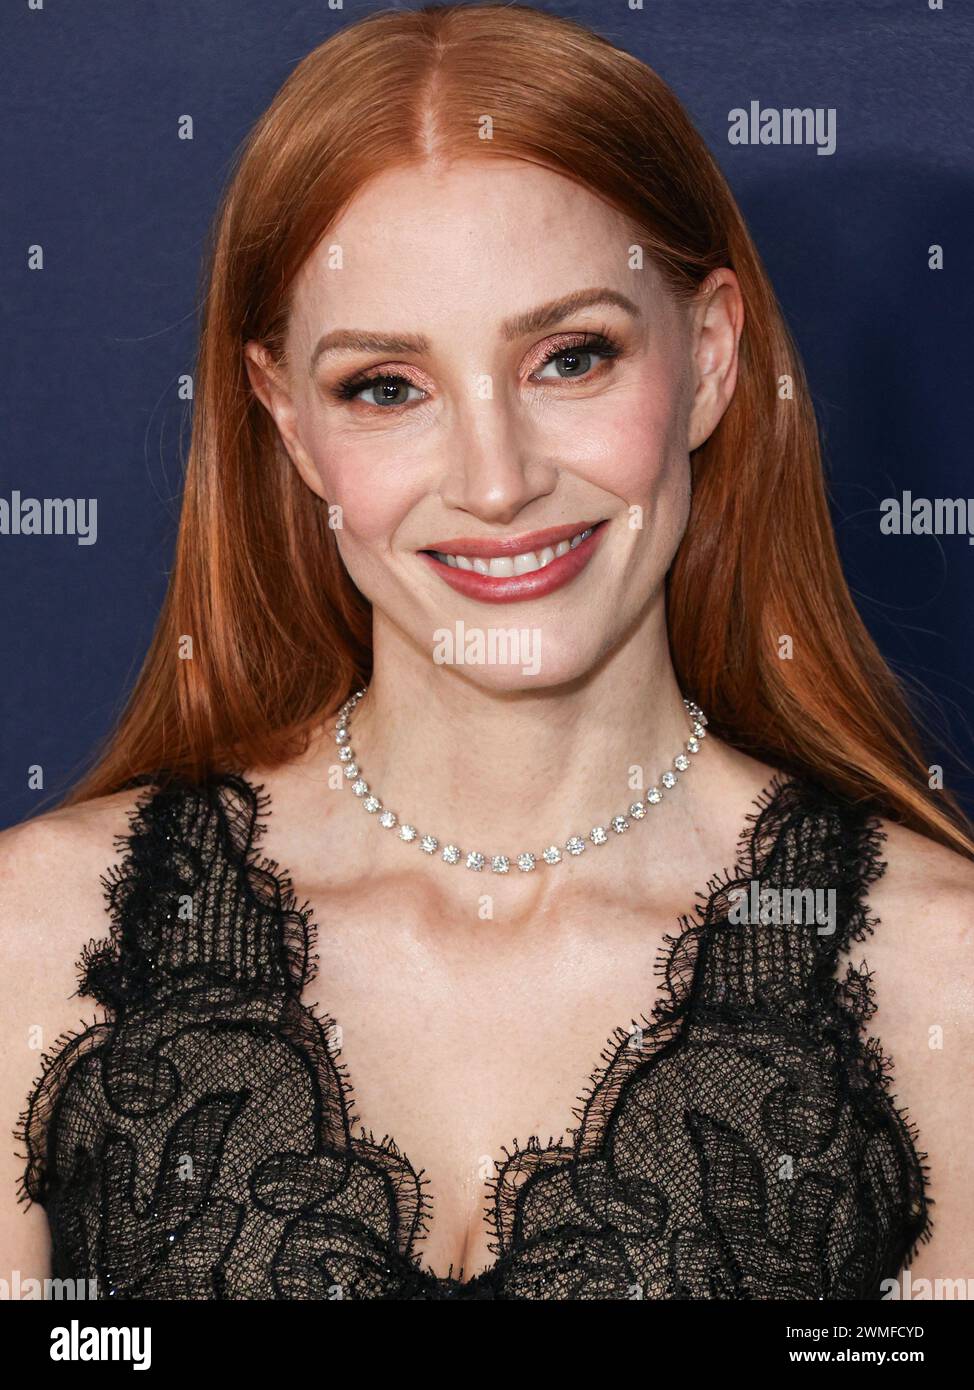 LOS ANGELES, CALIFORNIA, USA - FEBRUARY 24: Jessica Chastain wearing a custom Armani dress and DeBeers jewelry arrives at the 30th Annual Screen Actors Guild Awards held at the Shrine Auditorium and Expo Hall on February 24, 2024 in Los Angeles, California, United States. (Photo by Xavier Collin/Image Press Agency) Stock Photo